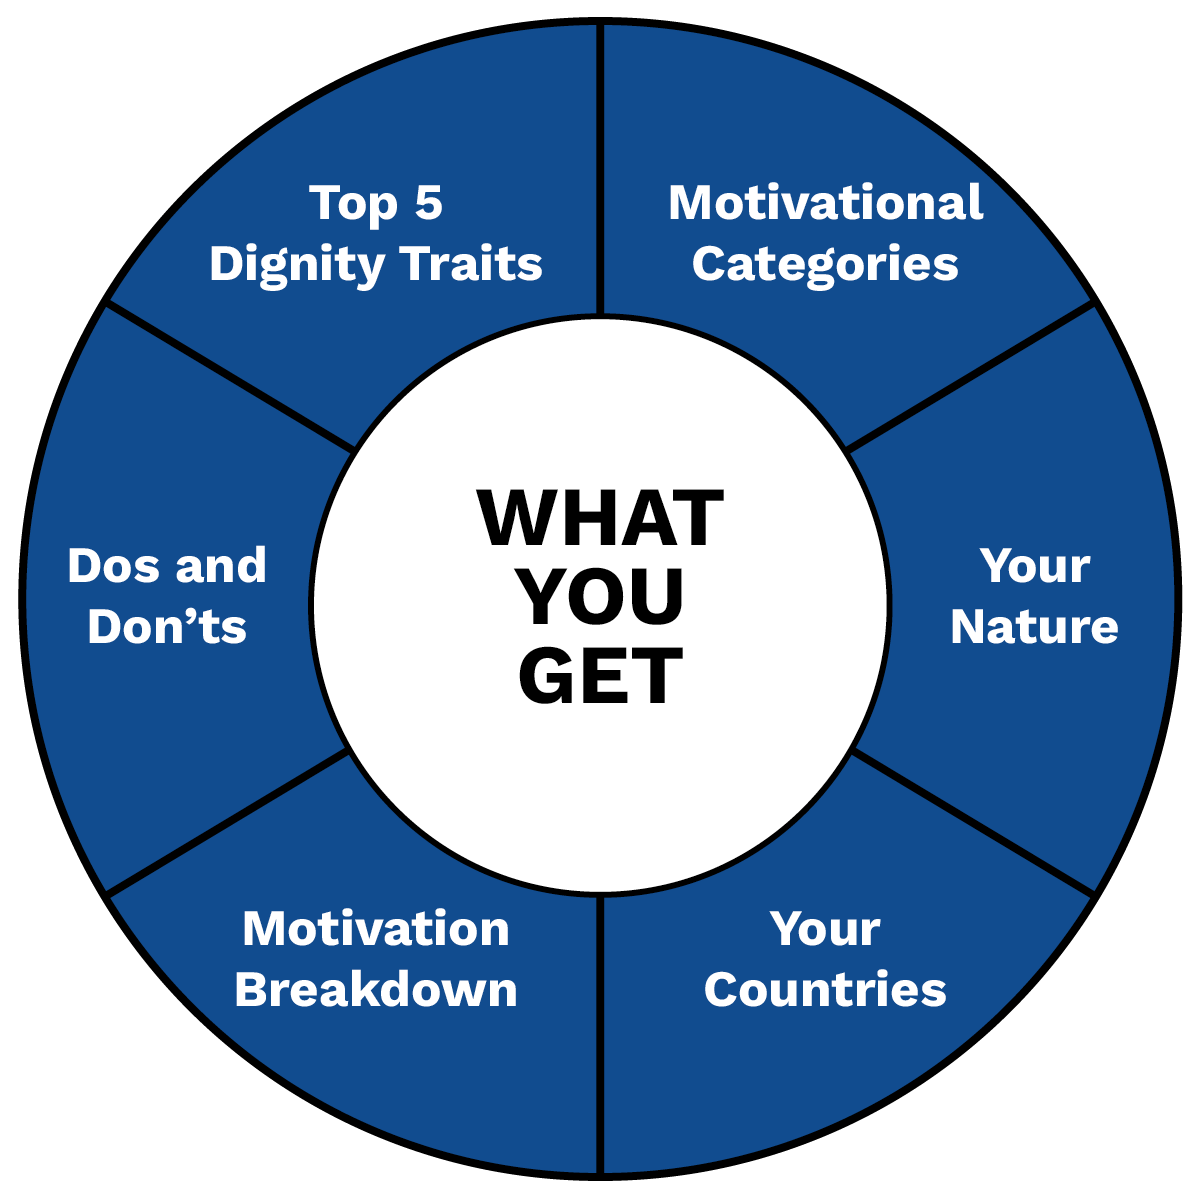 Chart of what is included in a Snapshot - Top 5 Dignity Traits, Motivational Categories, Motivation Breakdown, Dos and Don'ts, Your Countries, Your Nature